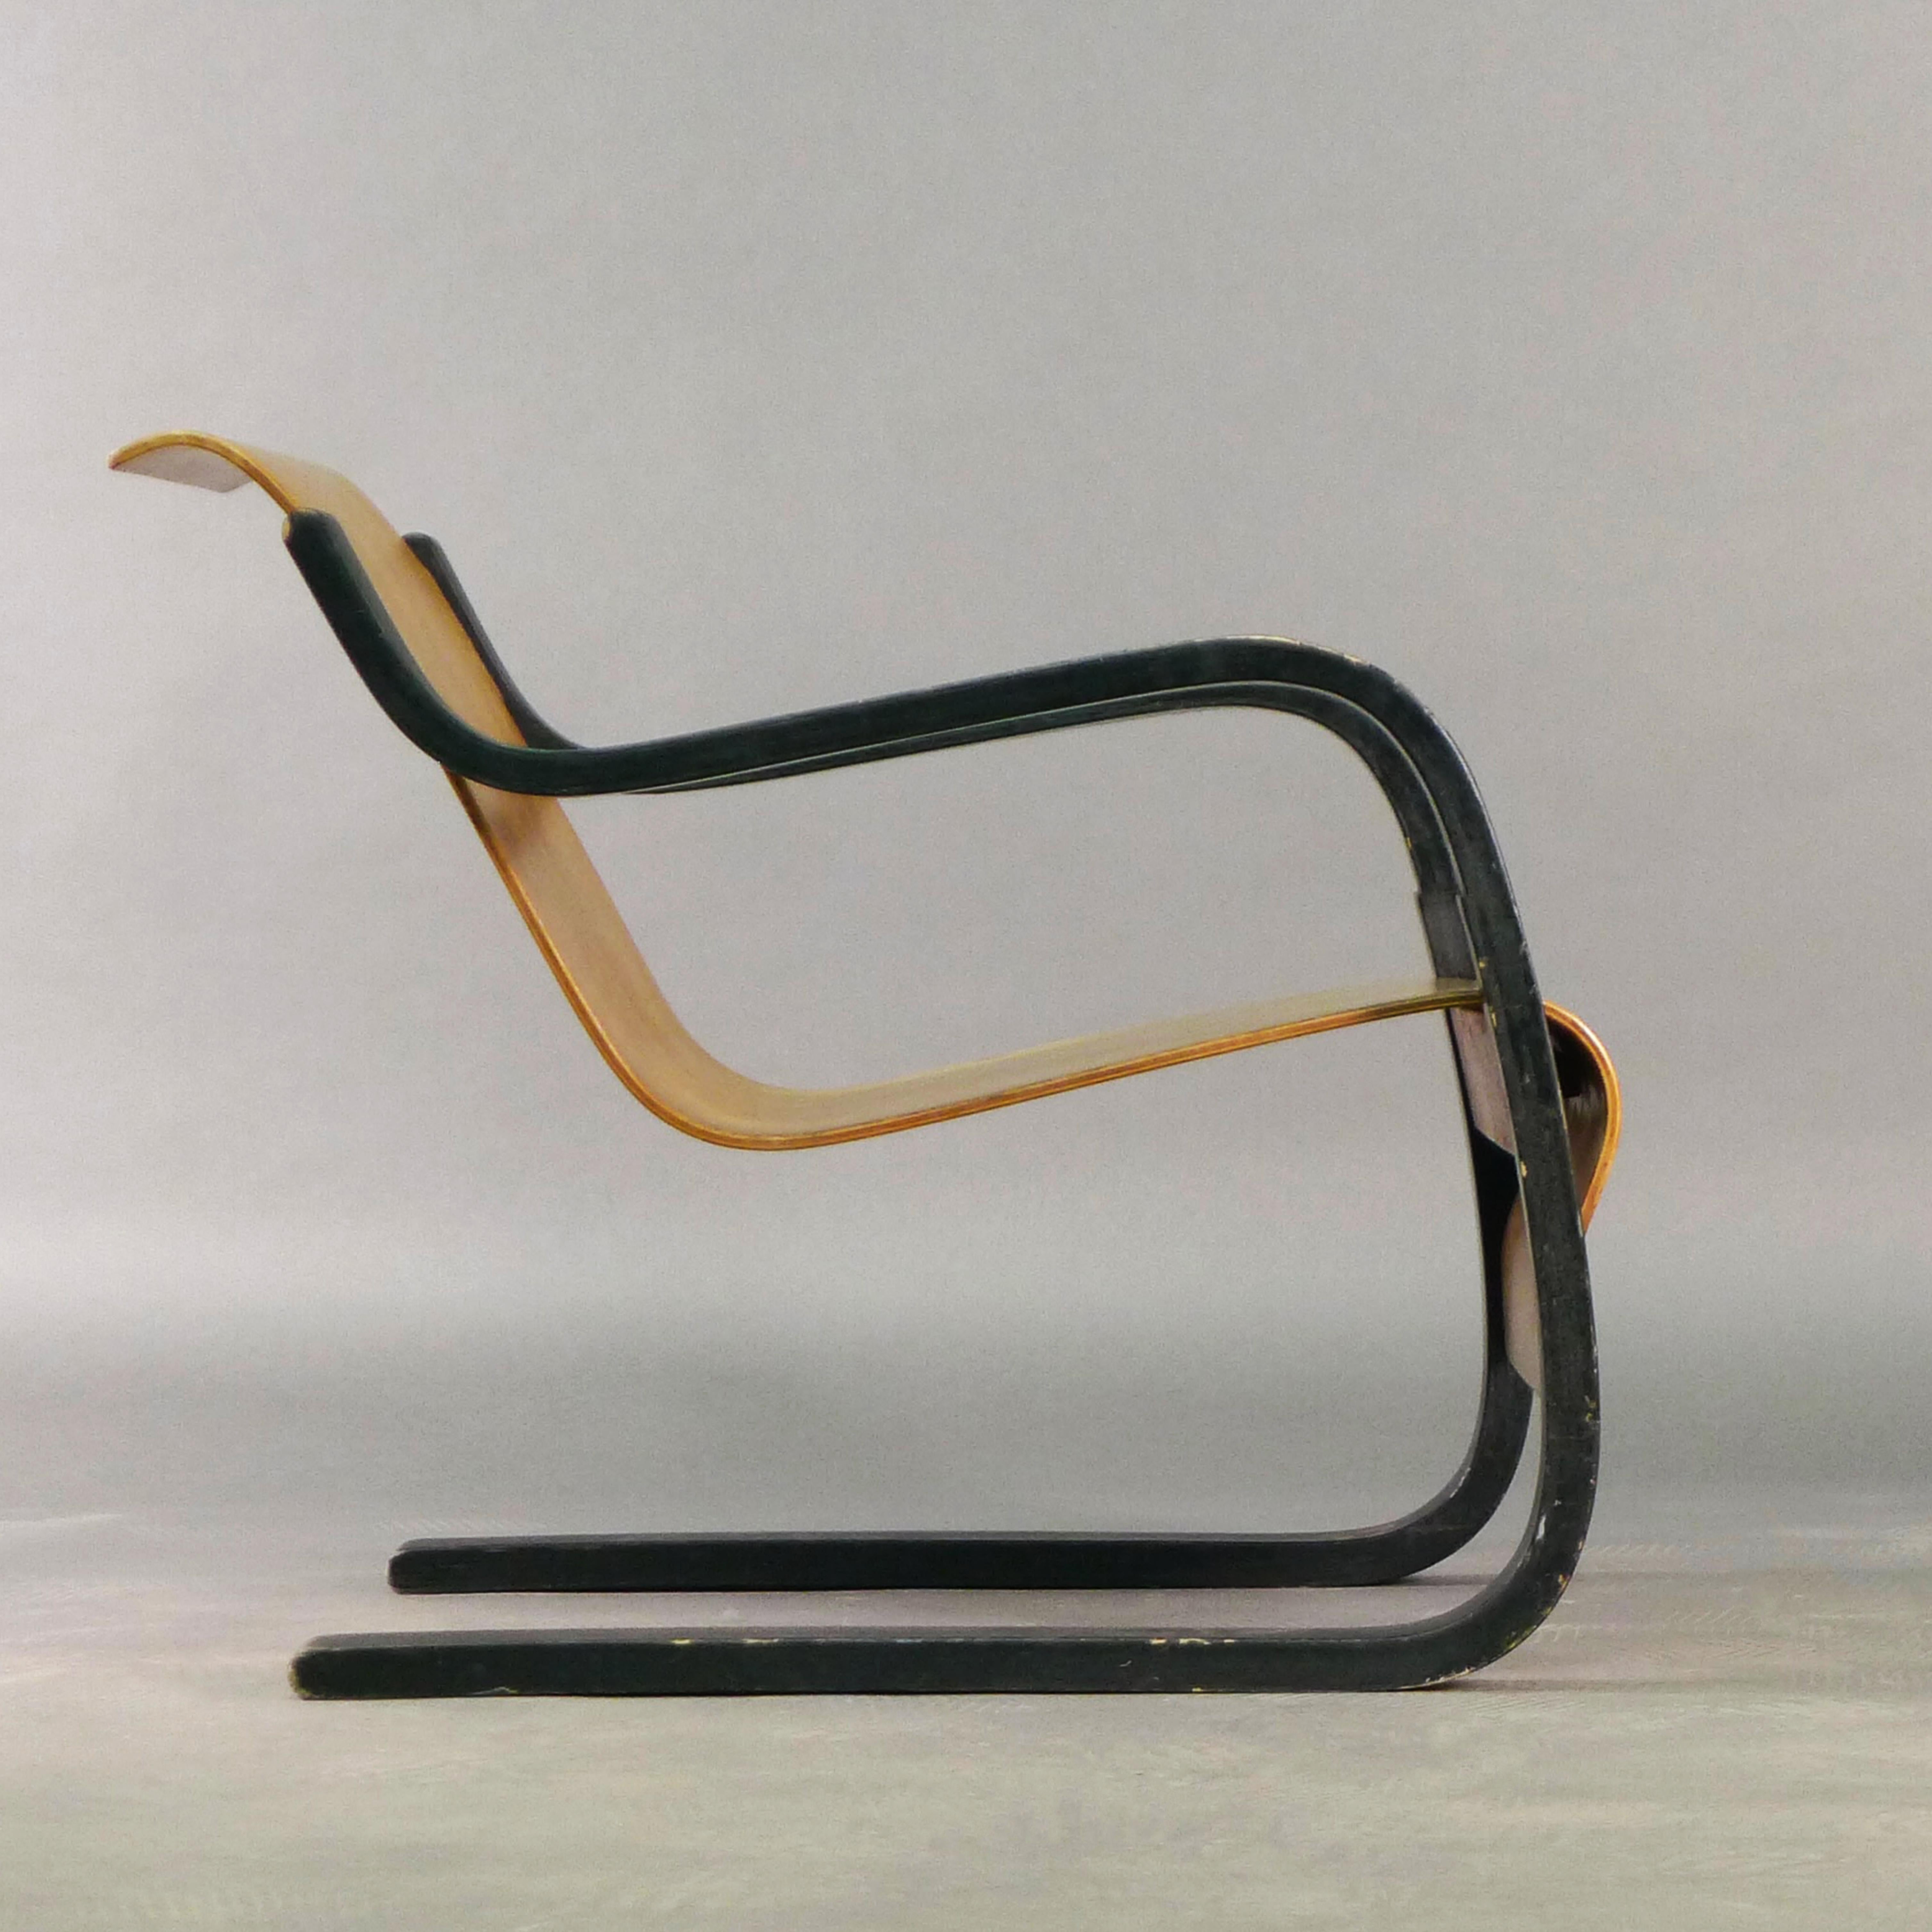 Alvar Aalto model 31 chair of moulded birch plywood, cantilevered one-piece seat and back suspended from bent supports painted black.

Designed in the 1930s and produced by Huonekalu-ja Rakennustyötehdas A.b. Turku in Finland for retail by